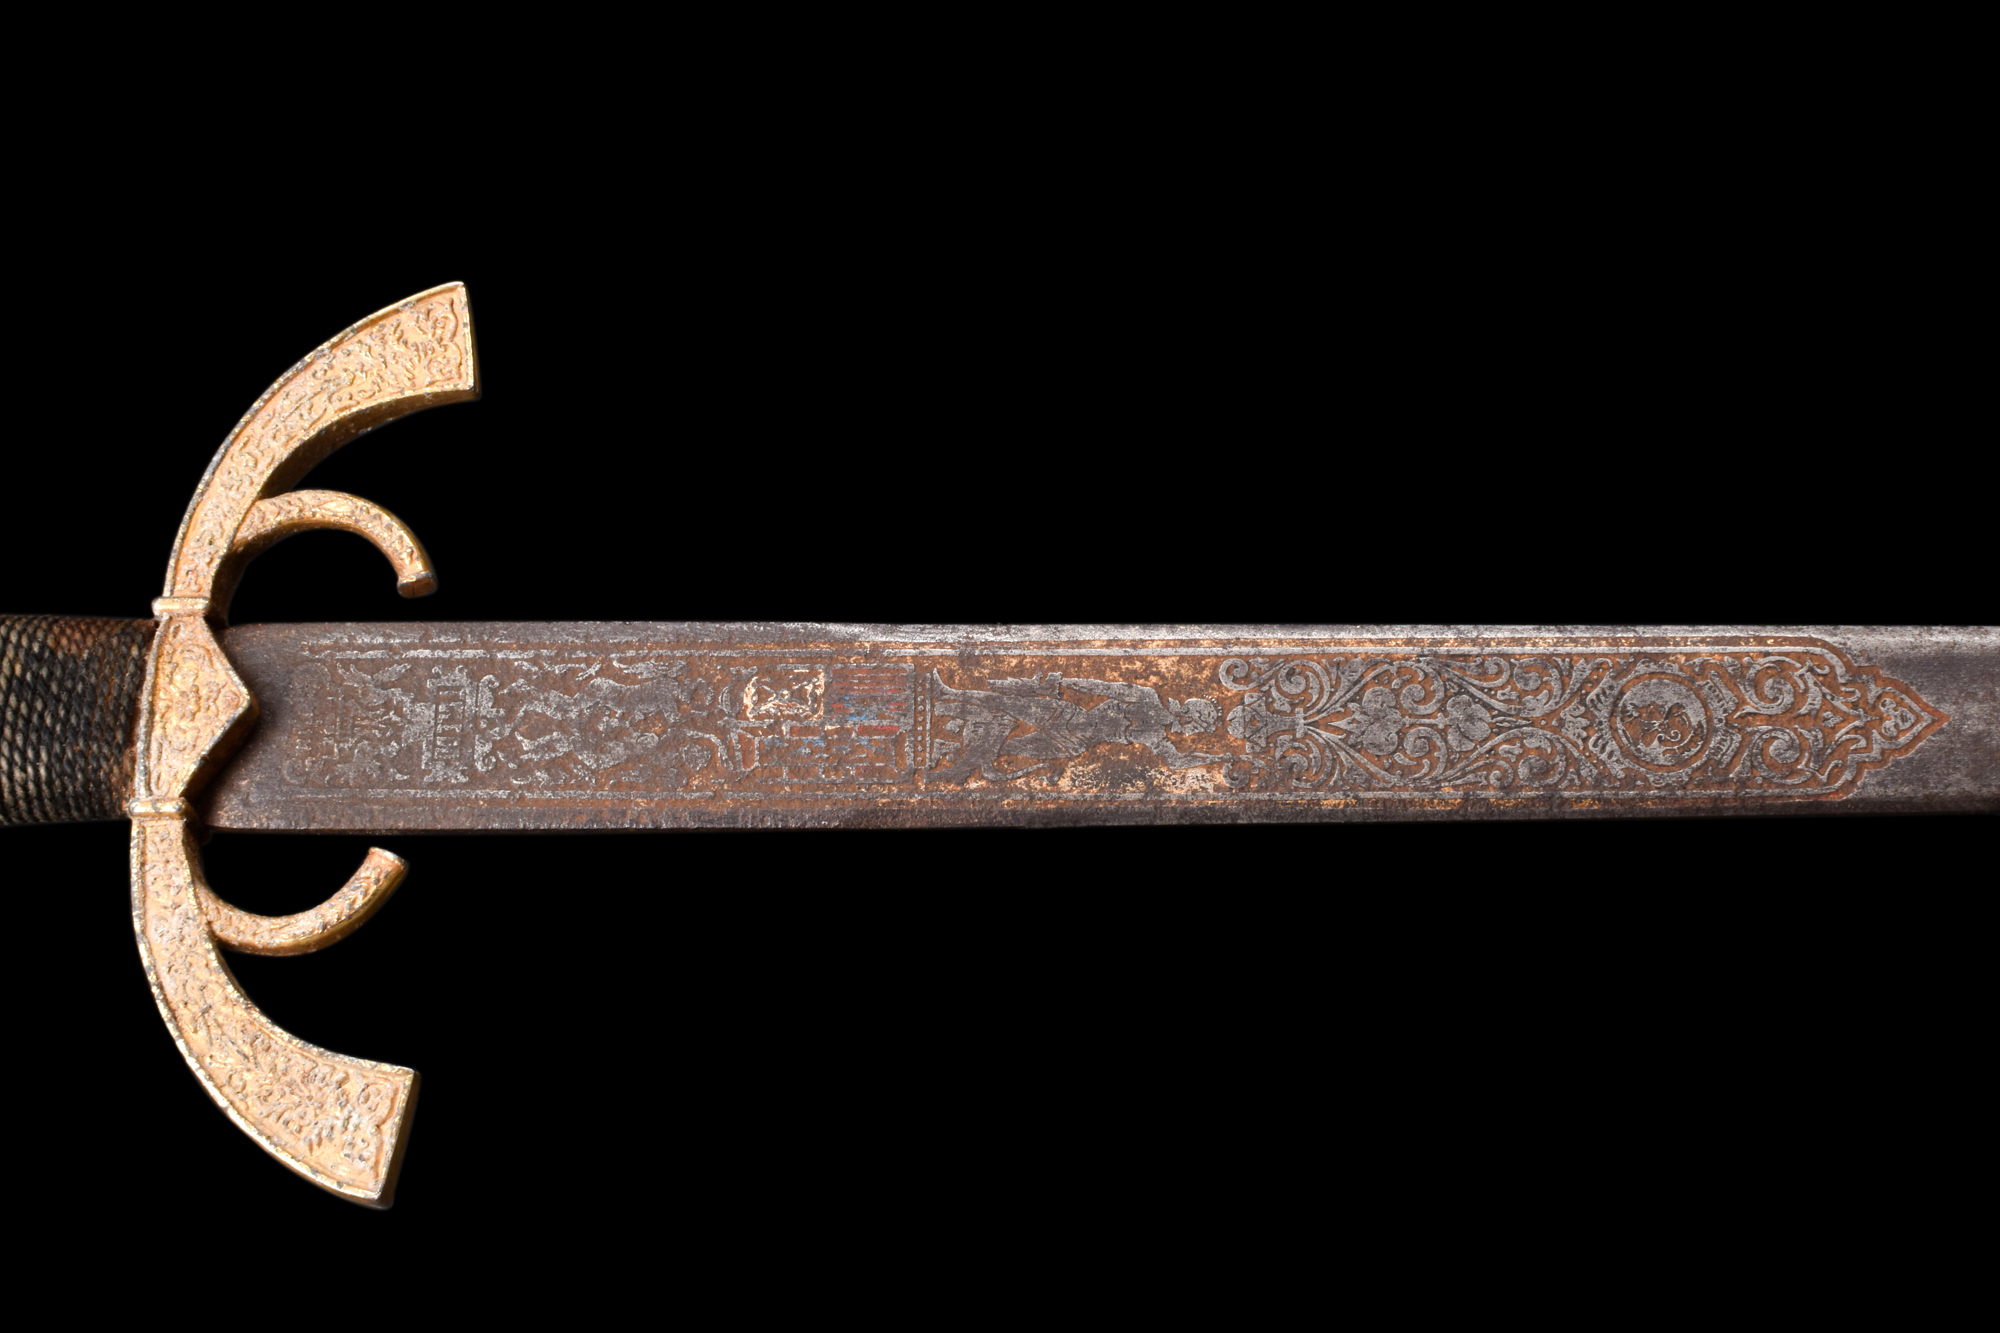 A SWORD IN 15TH CENTURY STYLE - Image 7 of 9